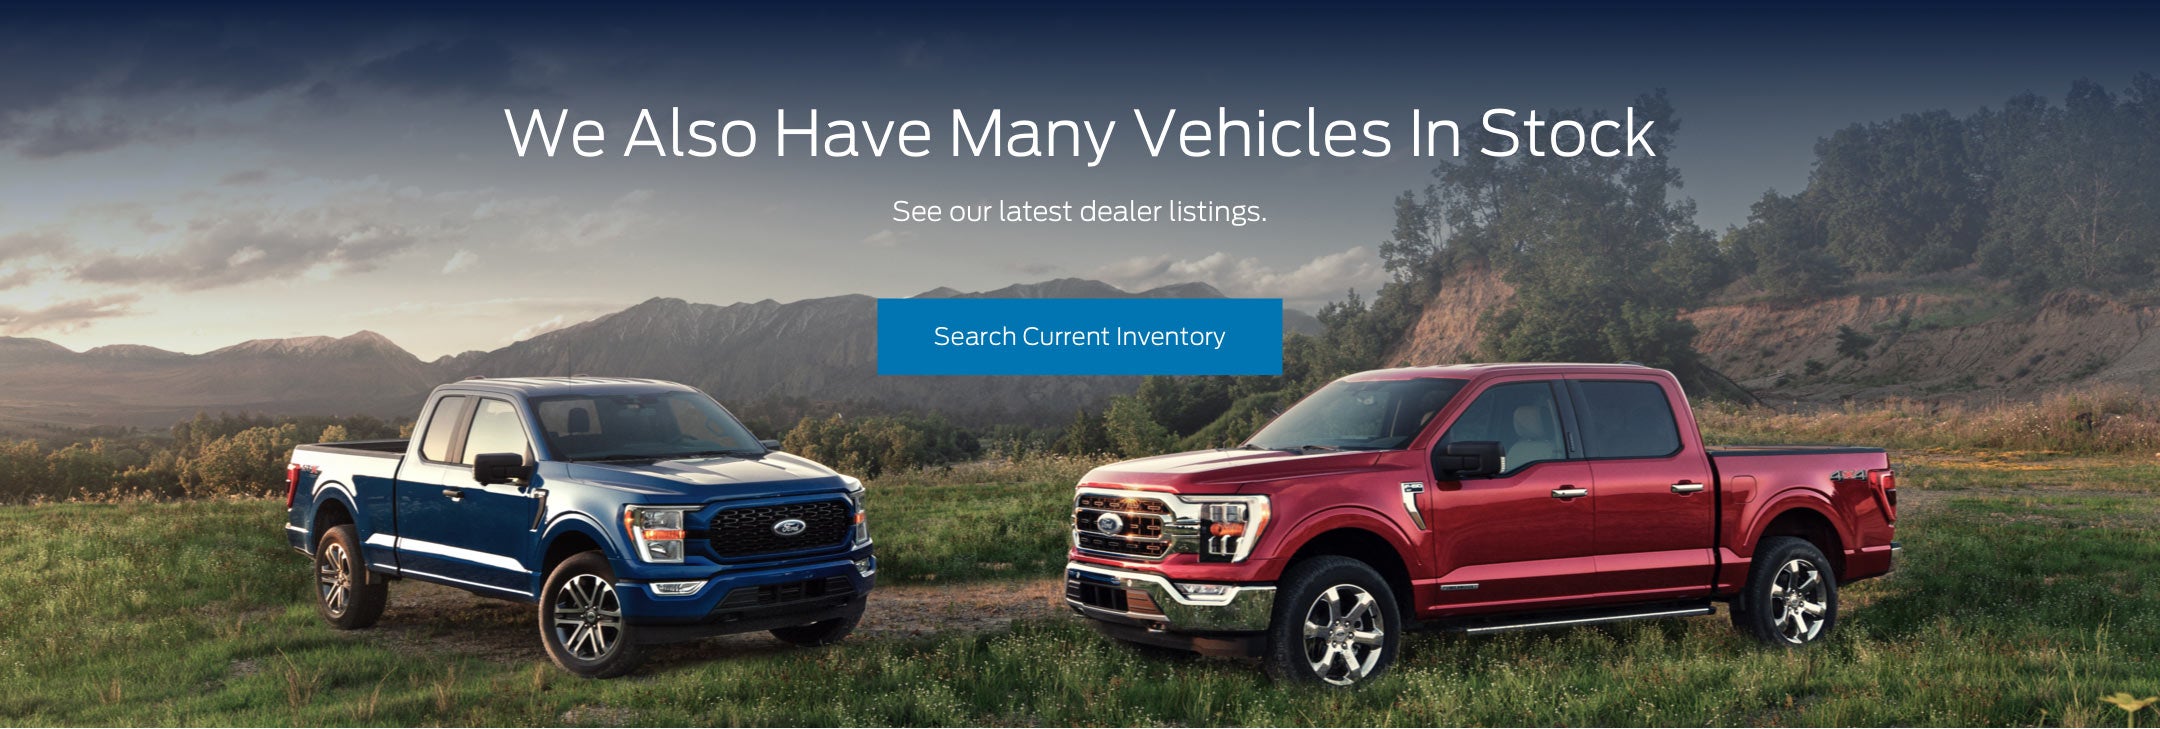 Ford vehicles in stock | Maples Ford in Warsaw MO